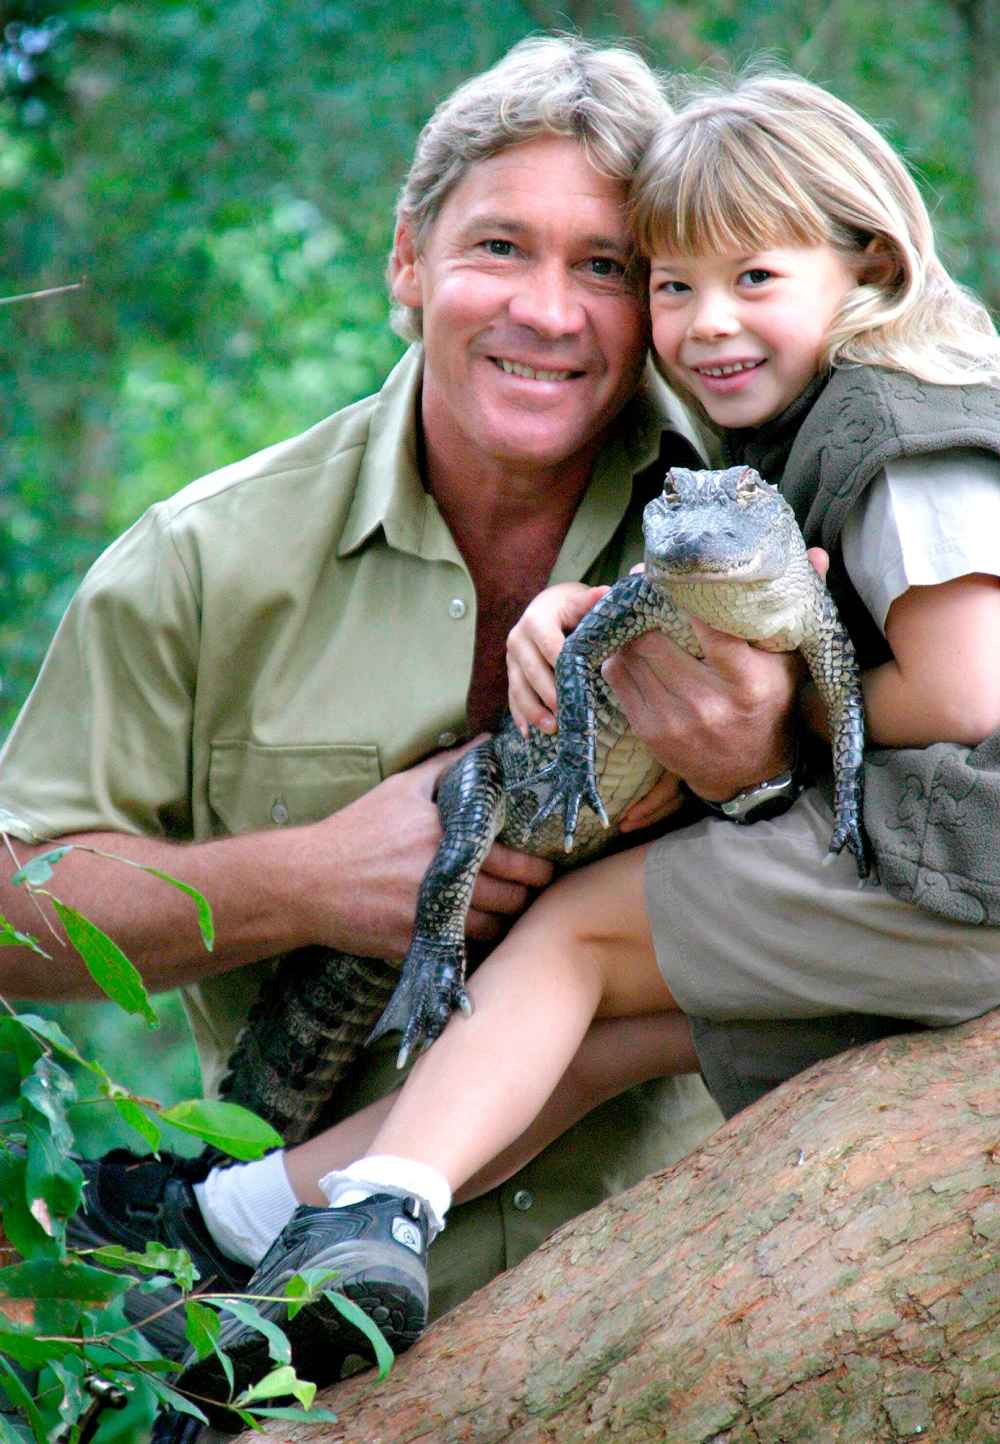 Steve Irwin with his daughter, Bindi Irwin, and a 3-year-old alligator called 'Russ' at Australia Zoo.